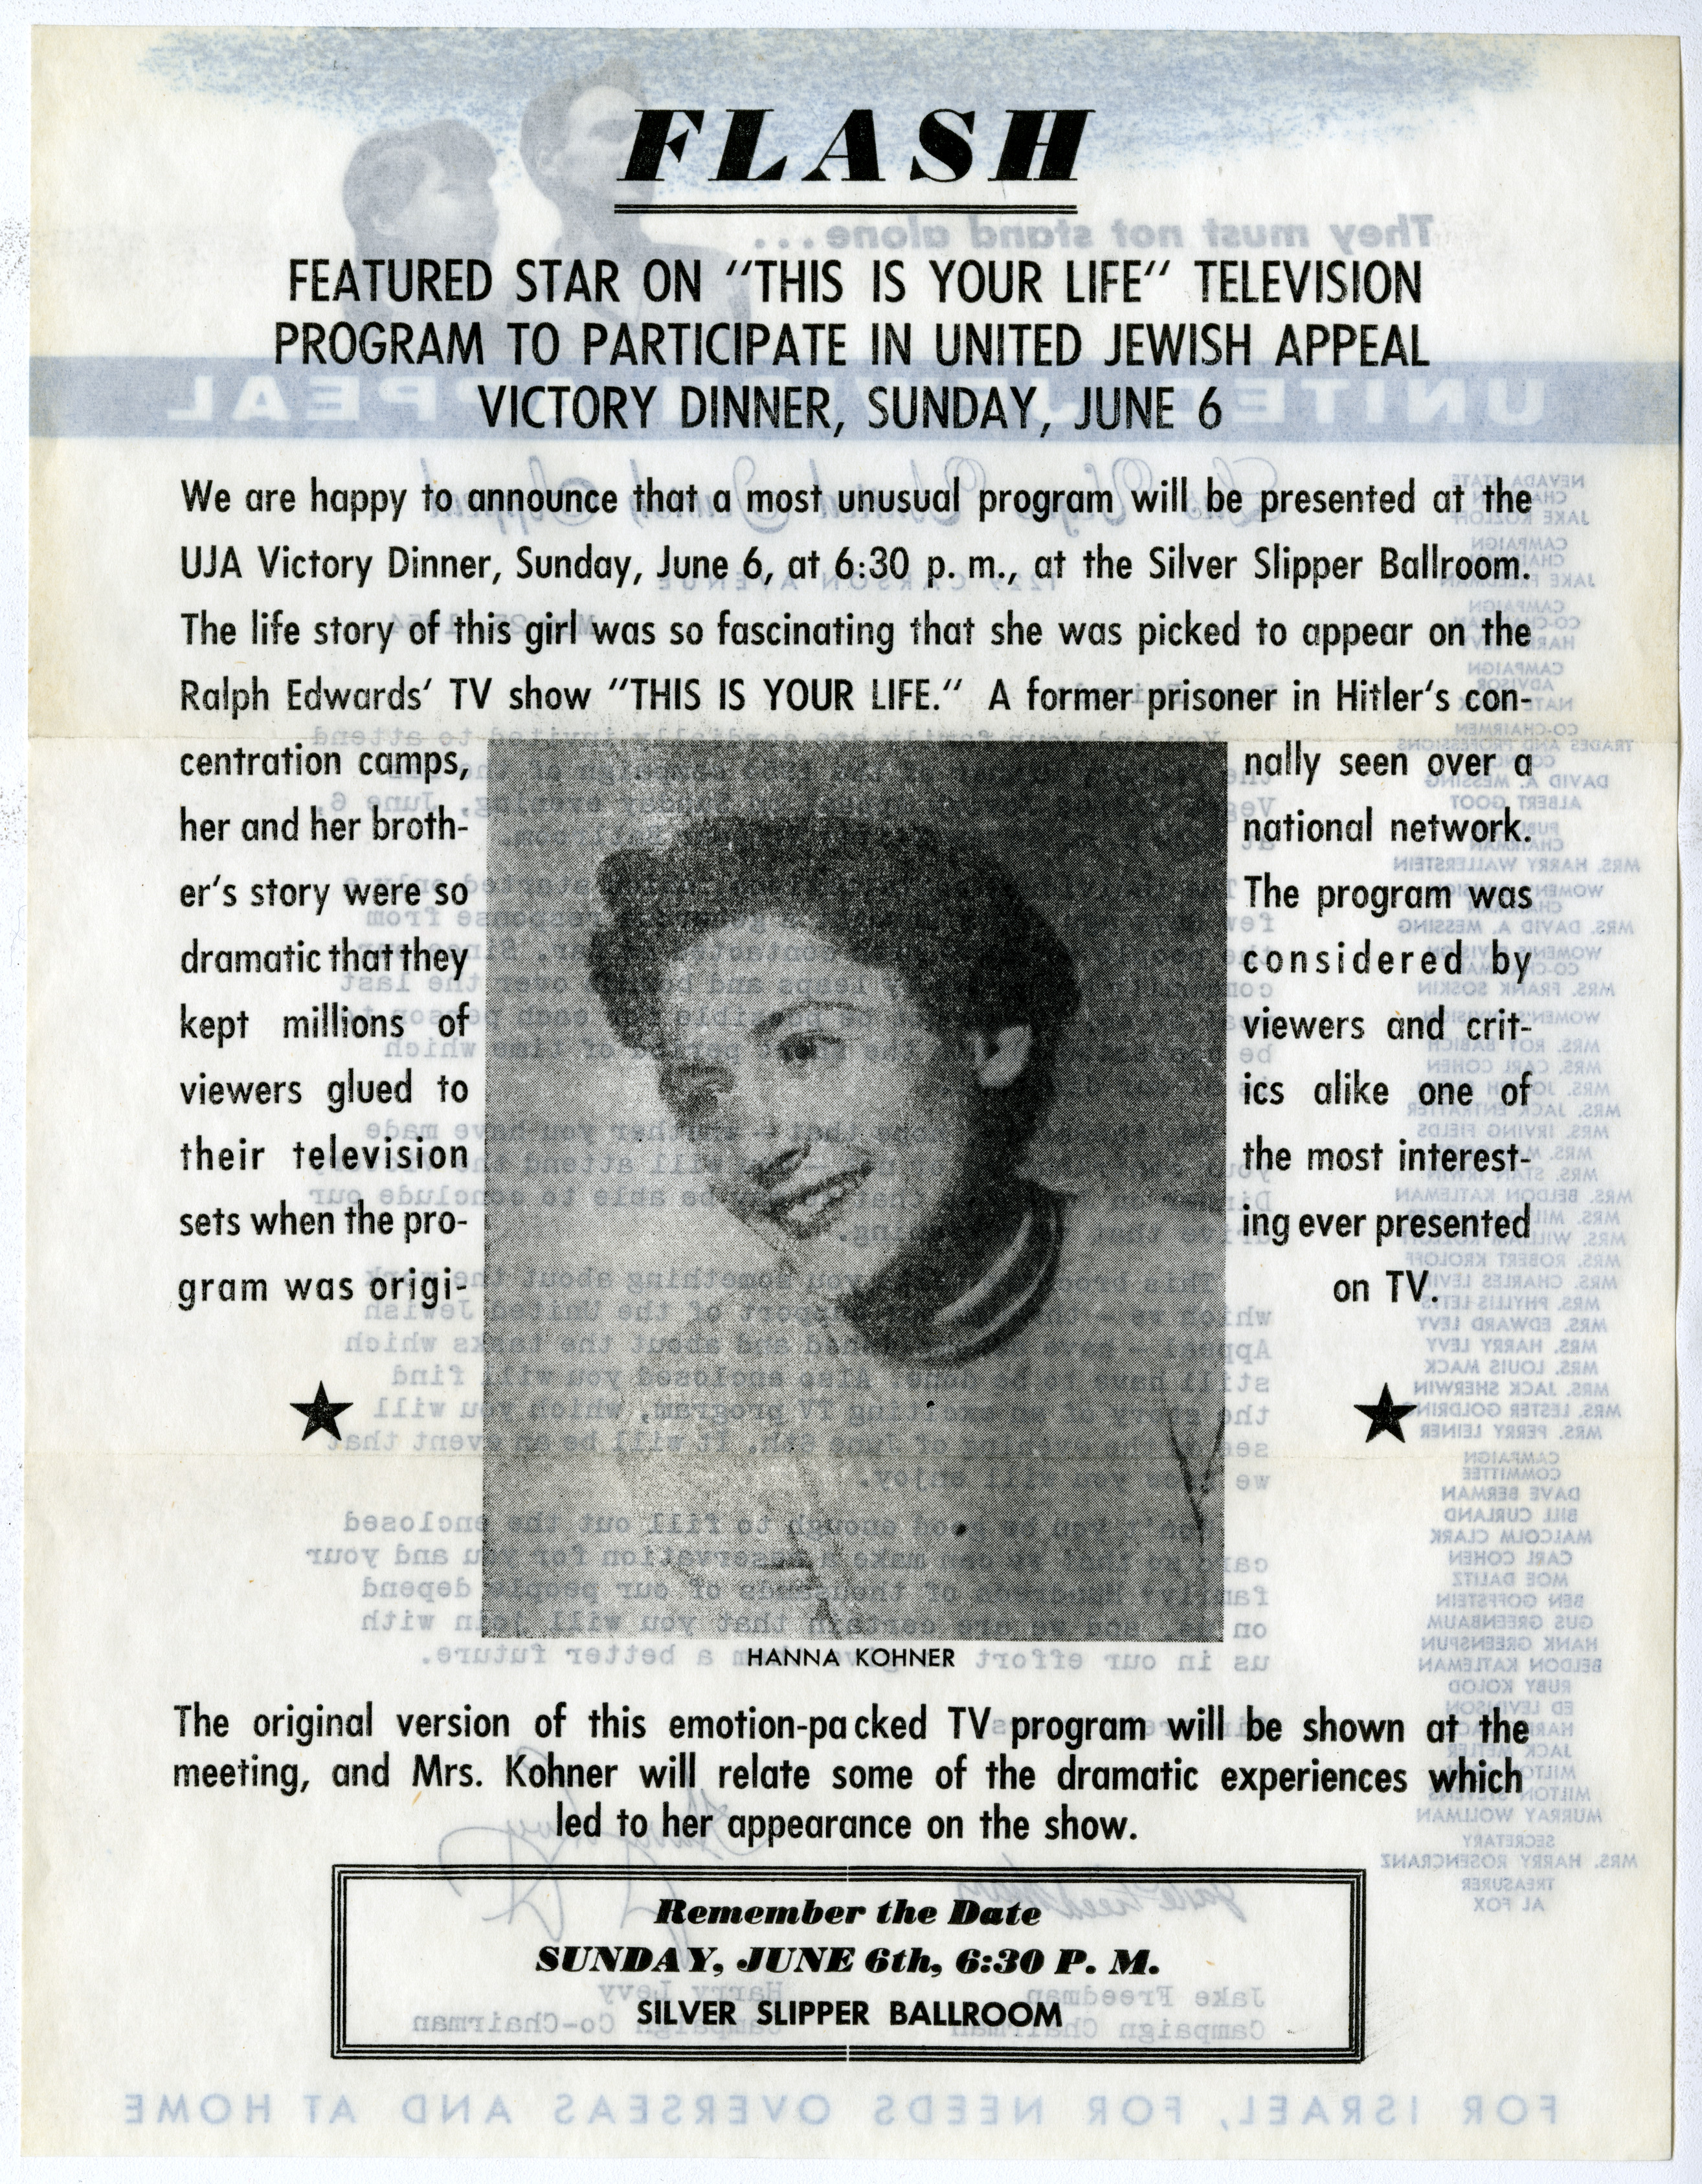 United Jewish Appeal Victory Dinner Invitation, May 25, 1954 (back)